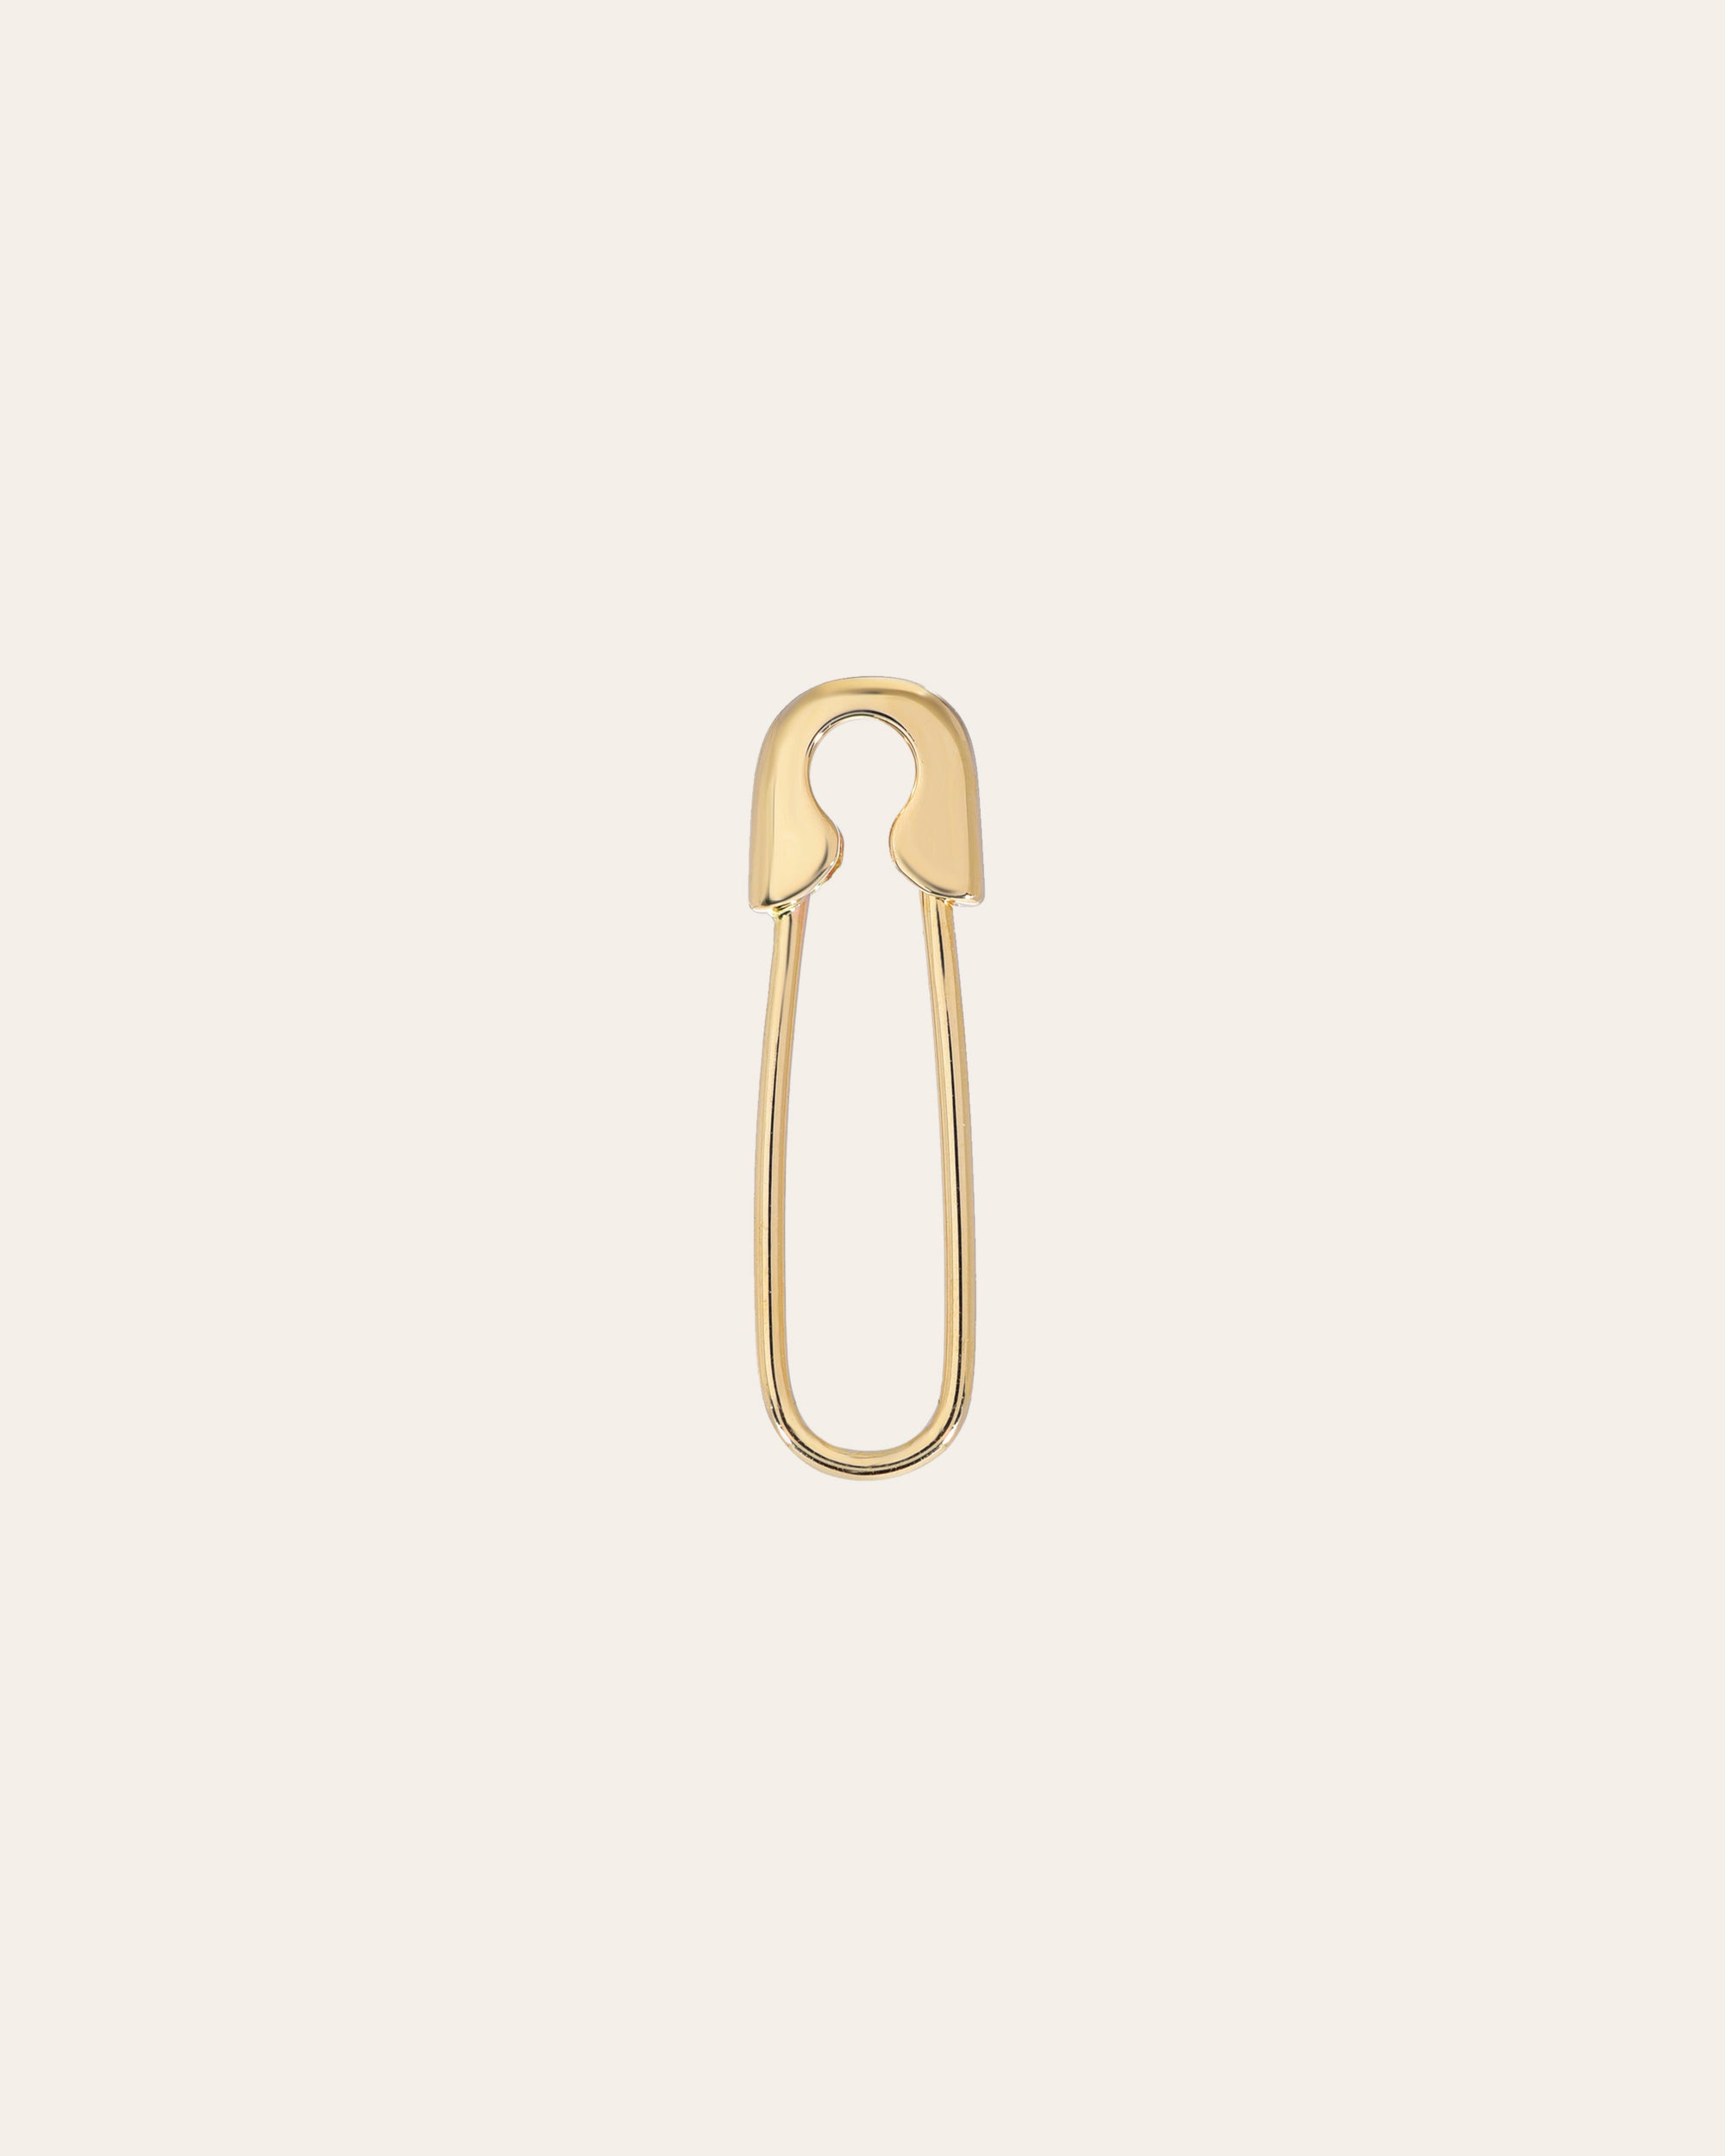 14k Yellow Gold Polished Safety Pin Earrings